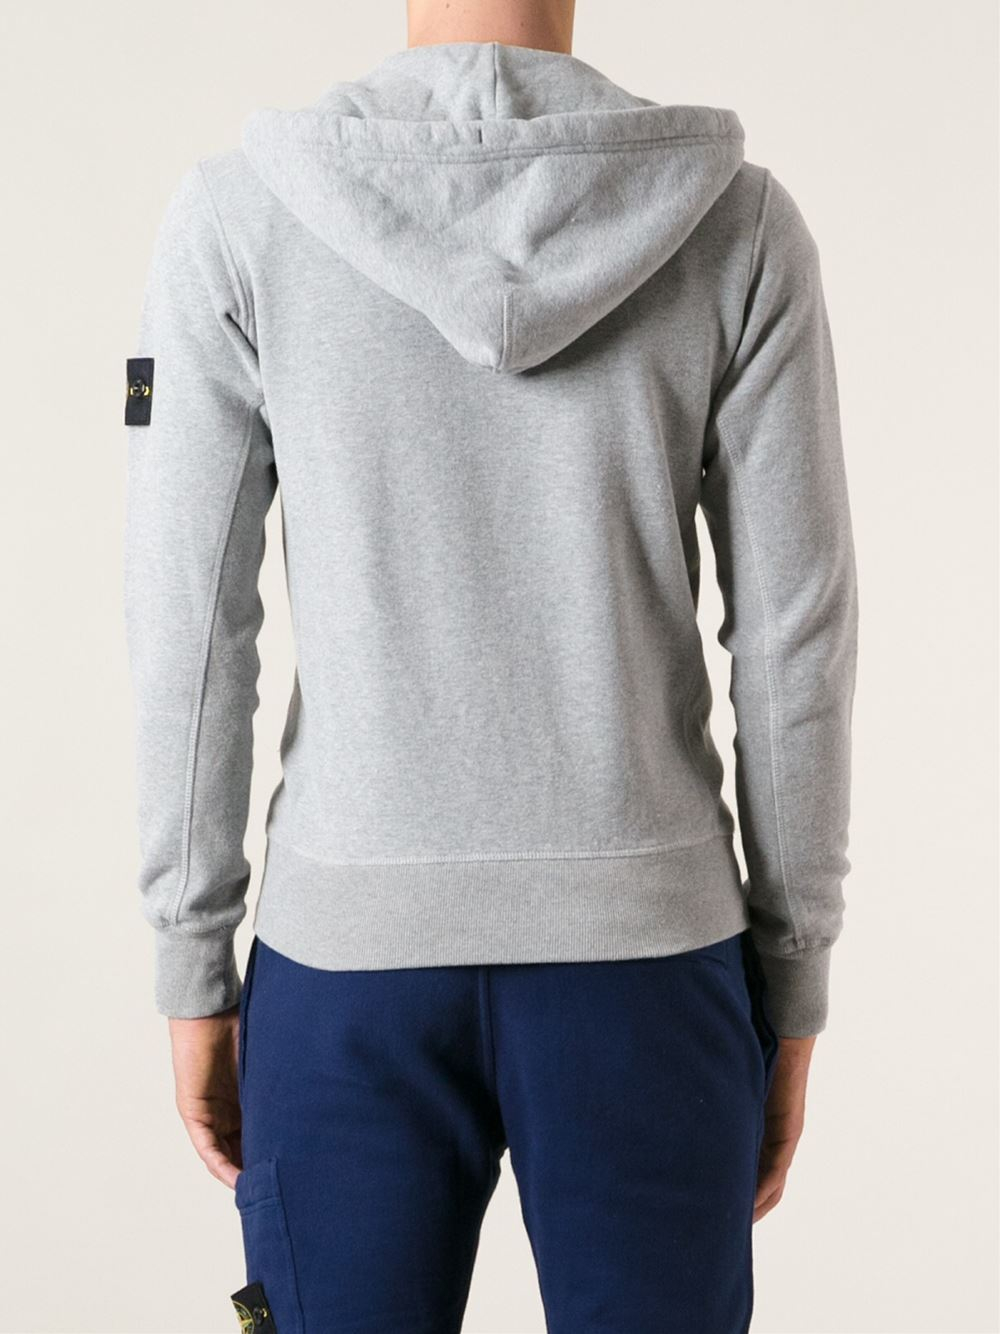 Lyst - Stone Island Drawstring Hoodie in Gray for Men